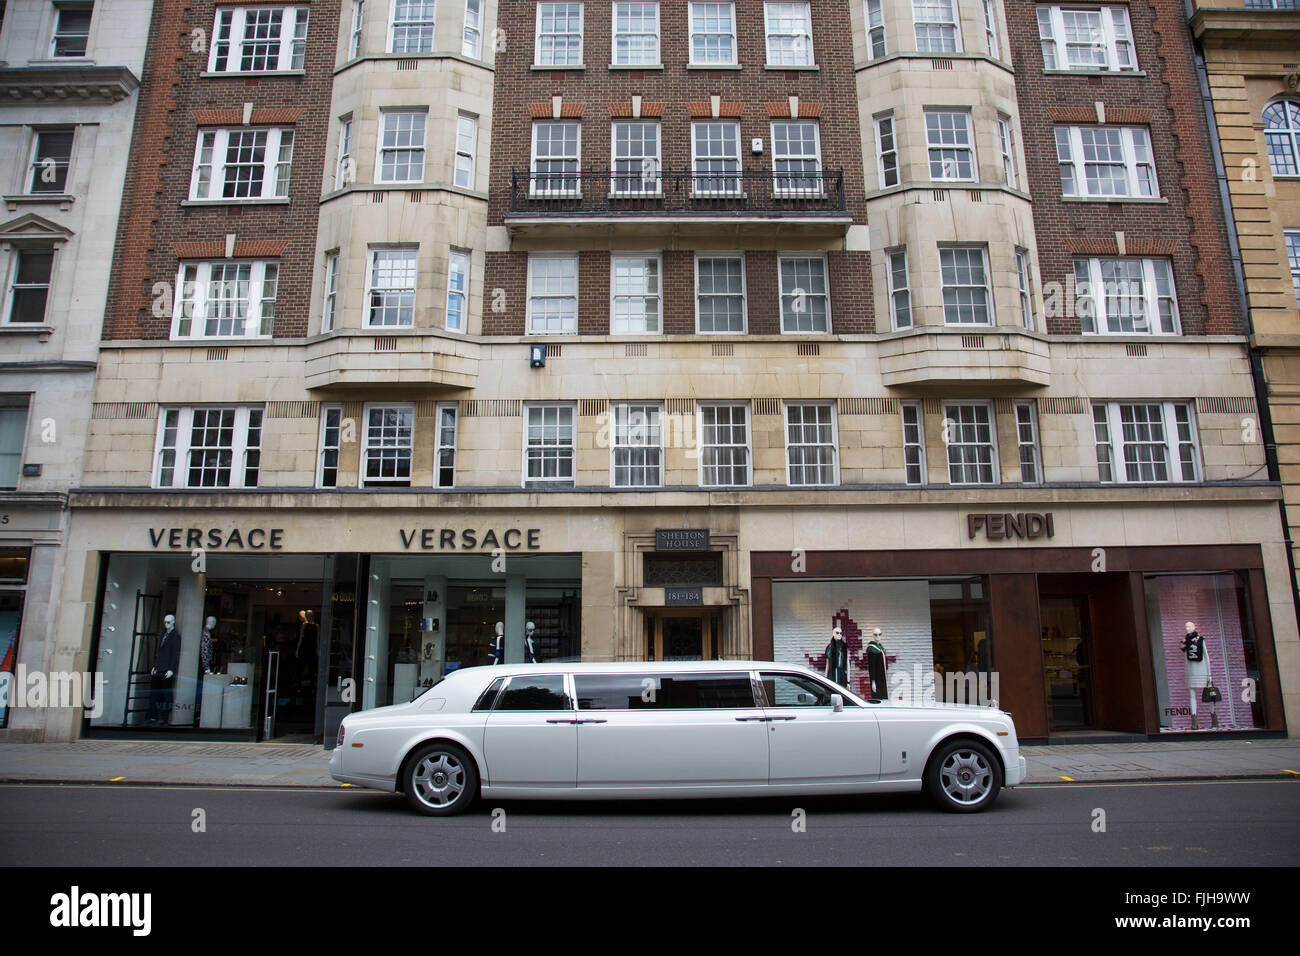 Stretch limousine Rolls Royce in Knightsbridge, London, UK. IN this wealthy part of West London, examples of extreme wealth and exclusive lifestyle are oppulantly on show everywhere you look. The choice of what car you drive or what clothes you wear all gives off an appearance of your rich status. Stock Photo